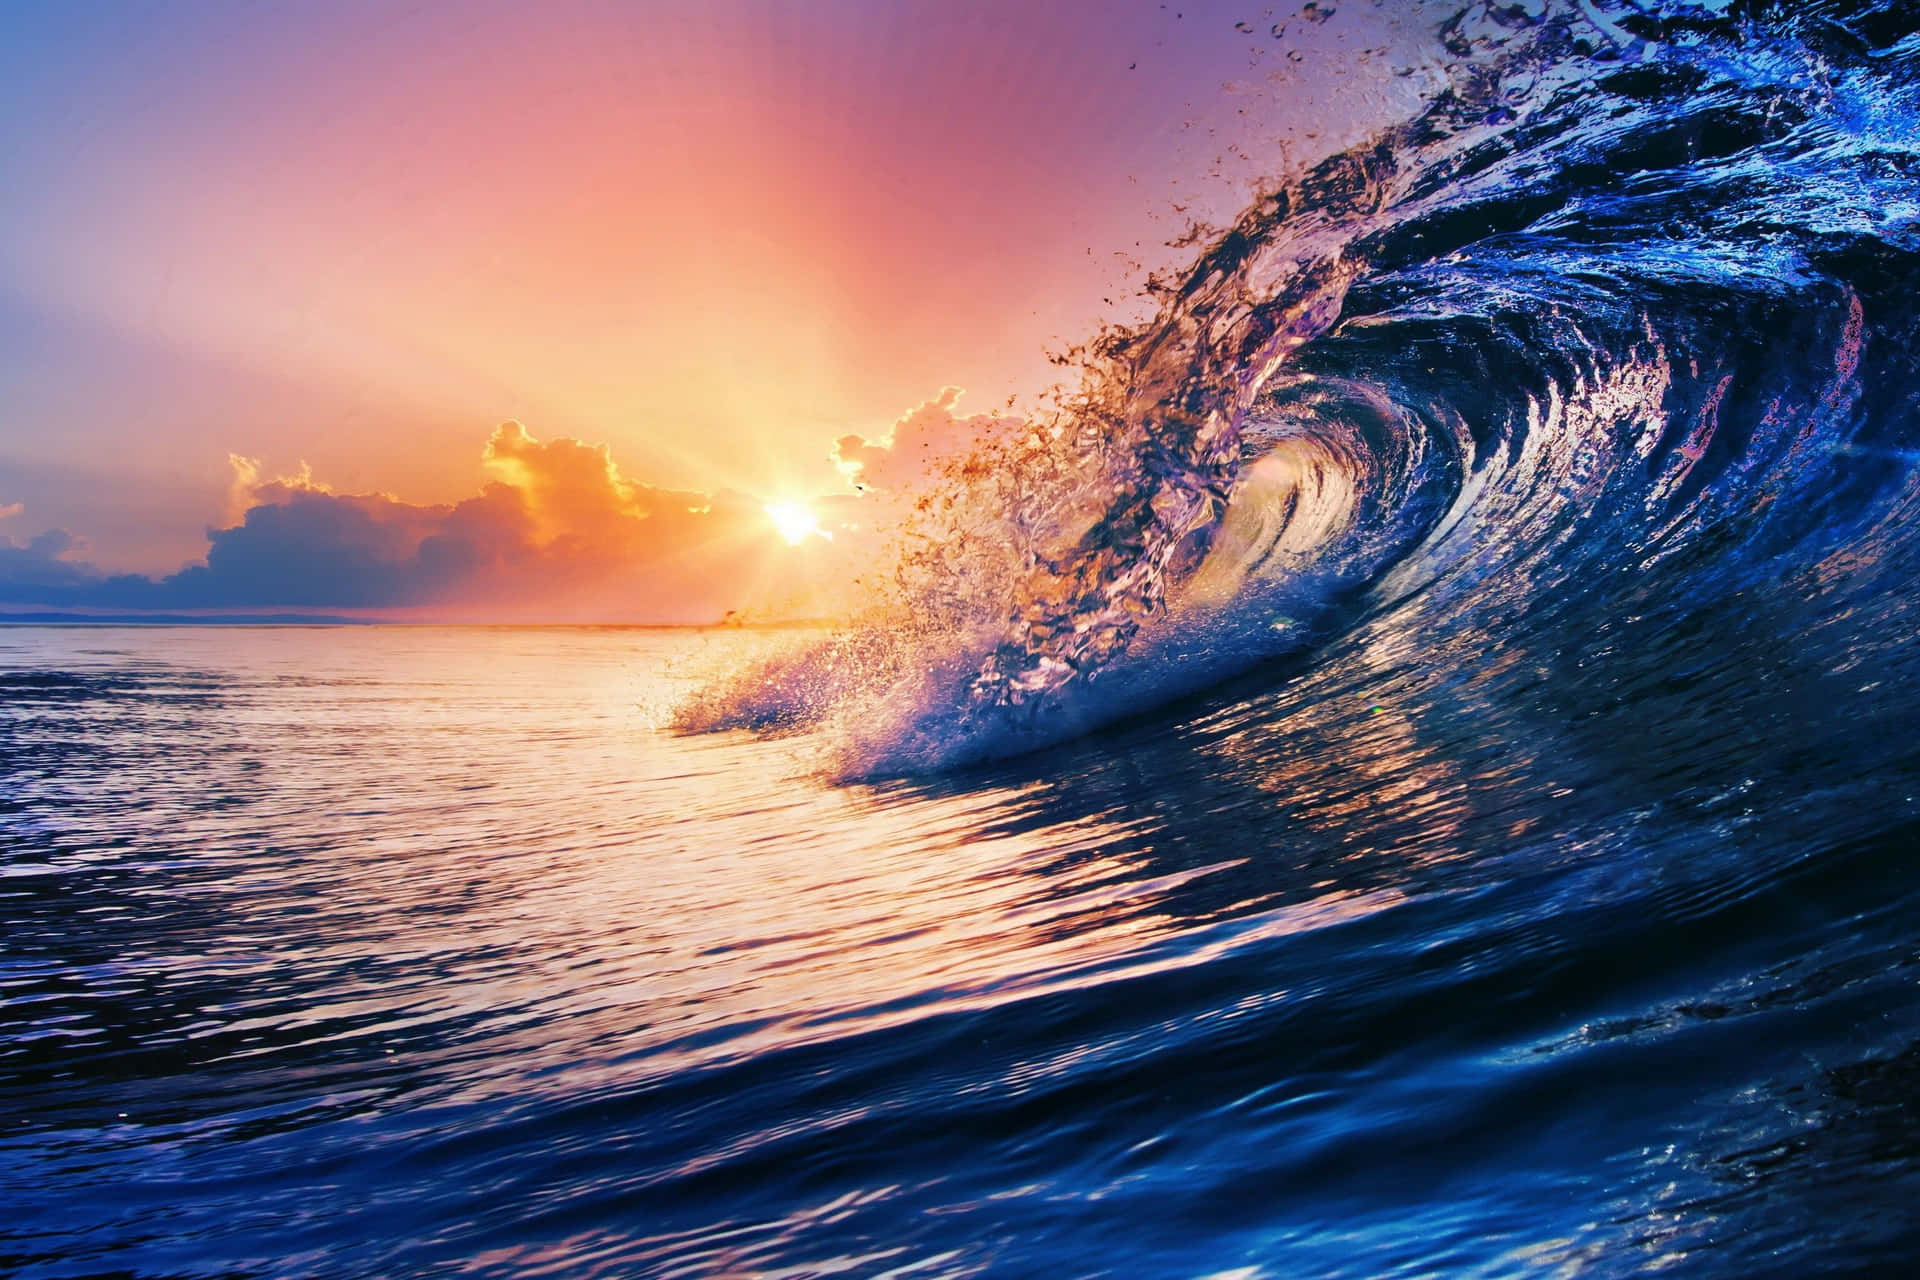 Captivating Ocean Waves at Sunset